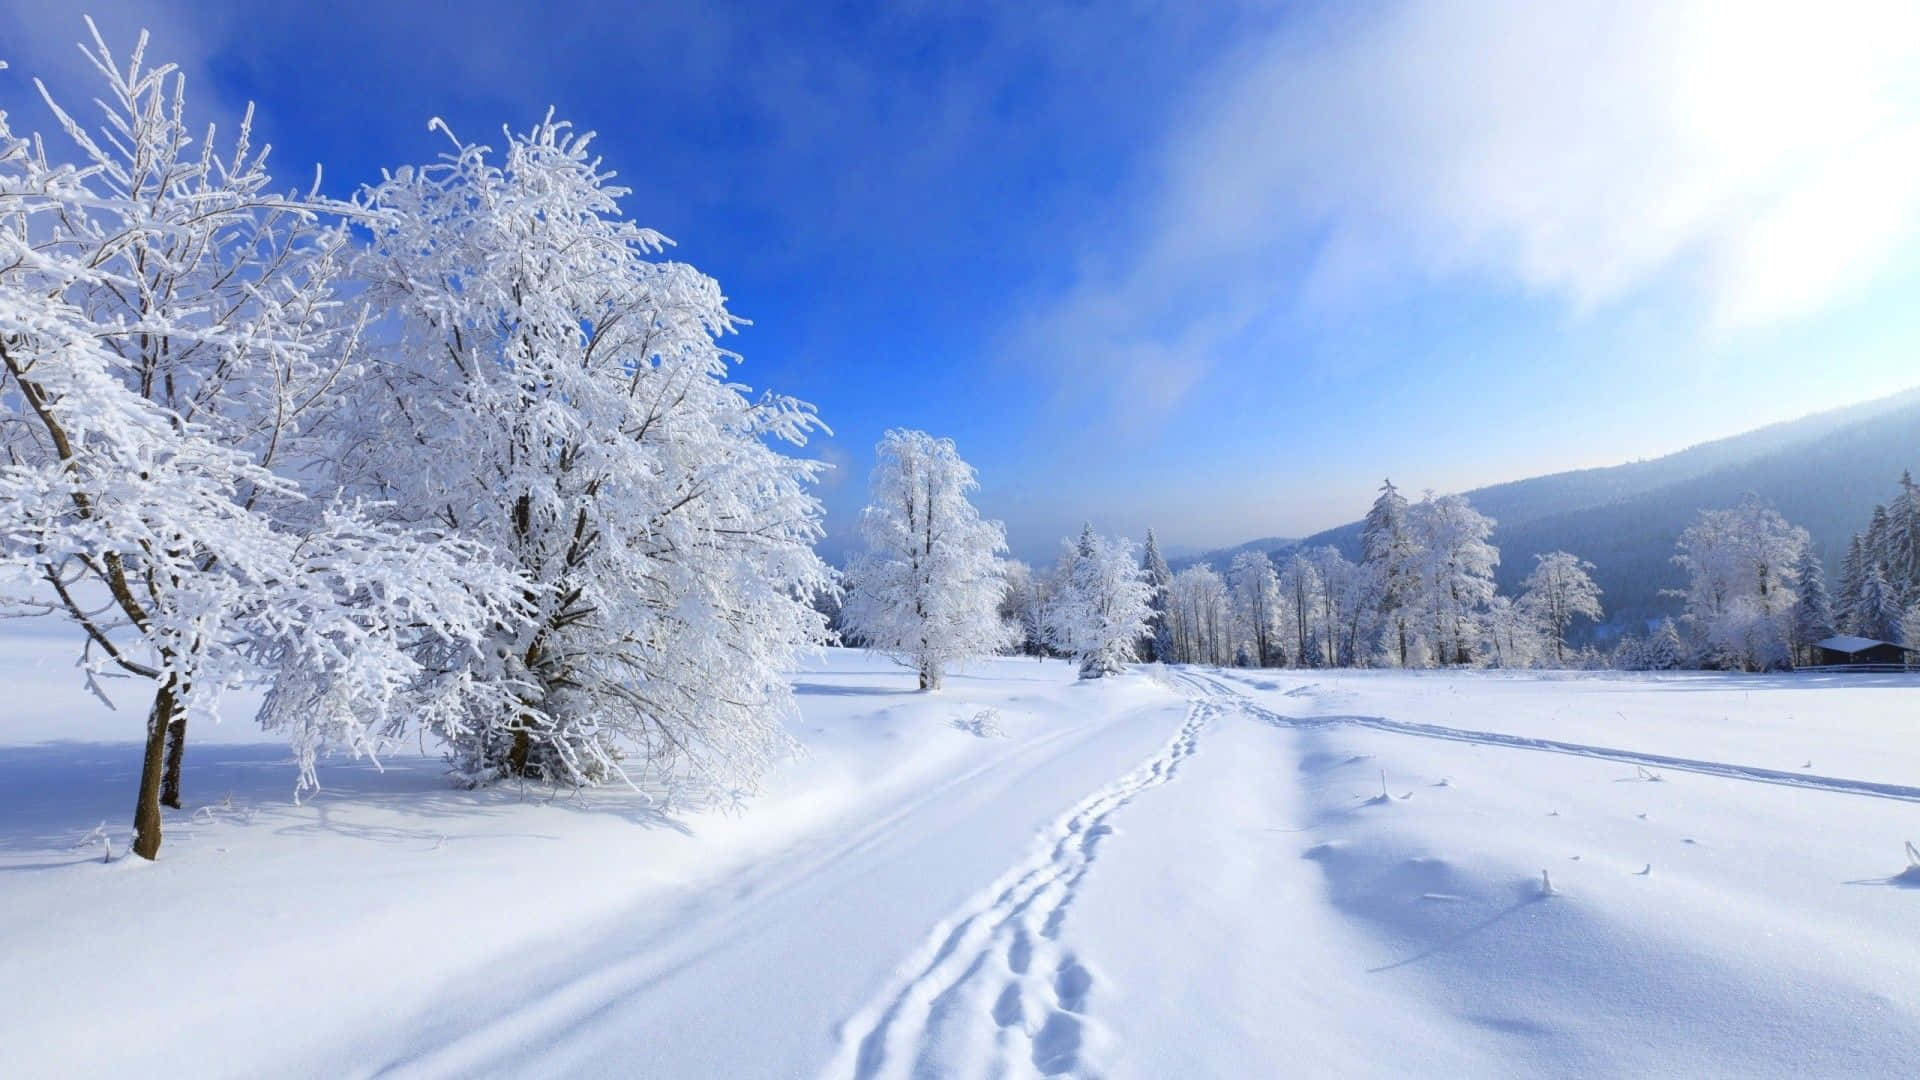 Enjoy the Winter season with this stunning HD 1080p Winter Background